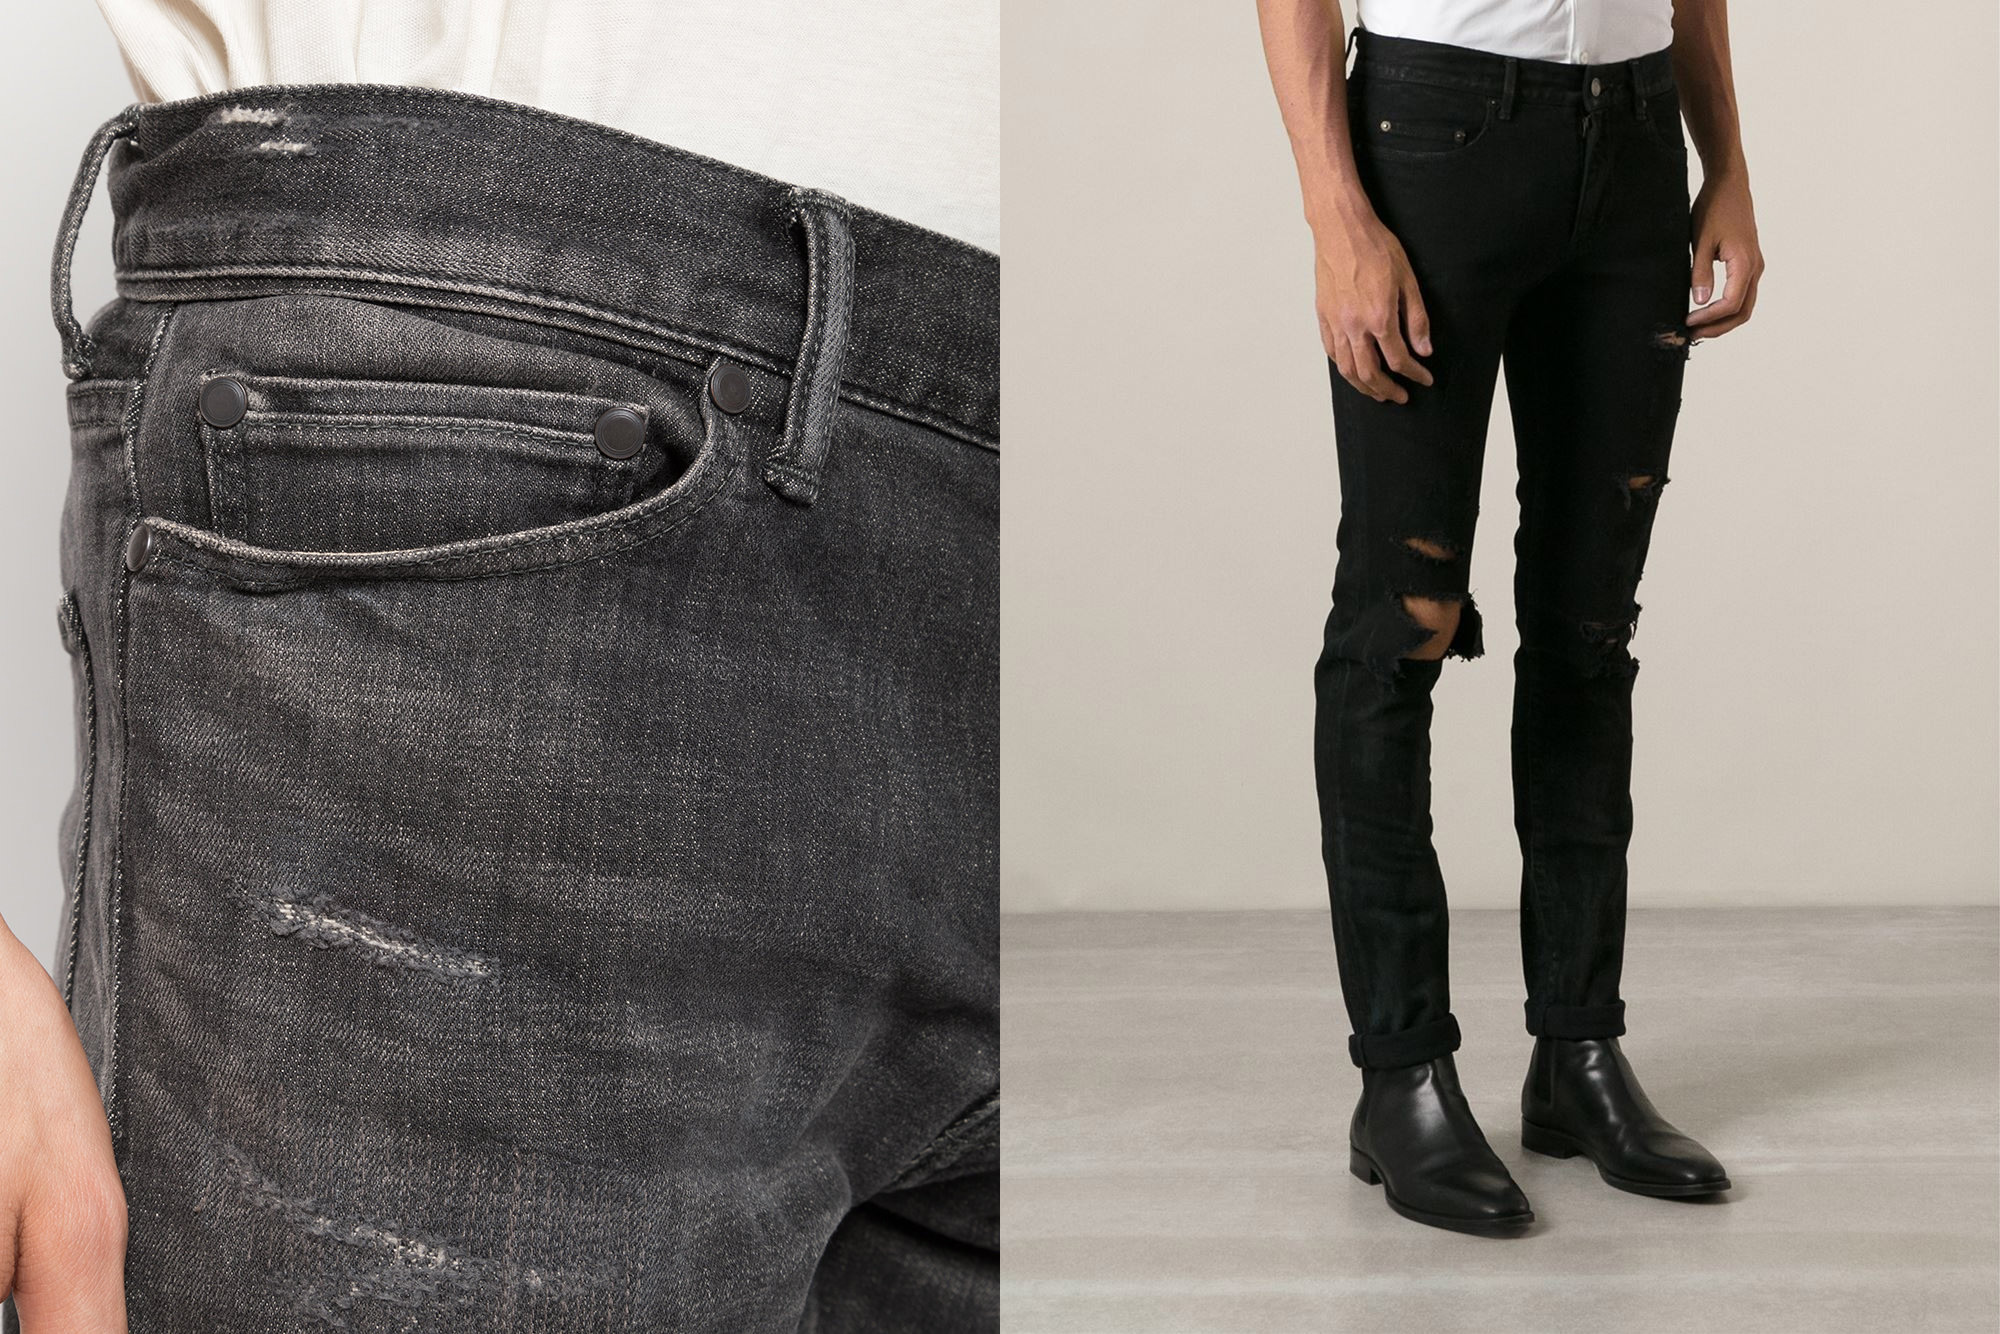 How To Wear \u0026 Style Black Jeans For Men